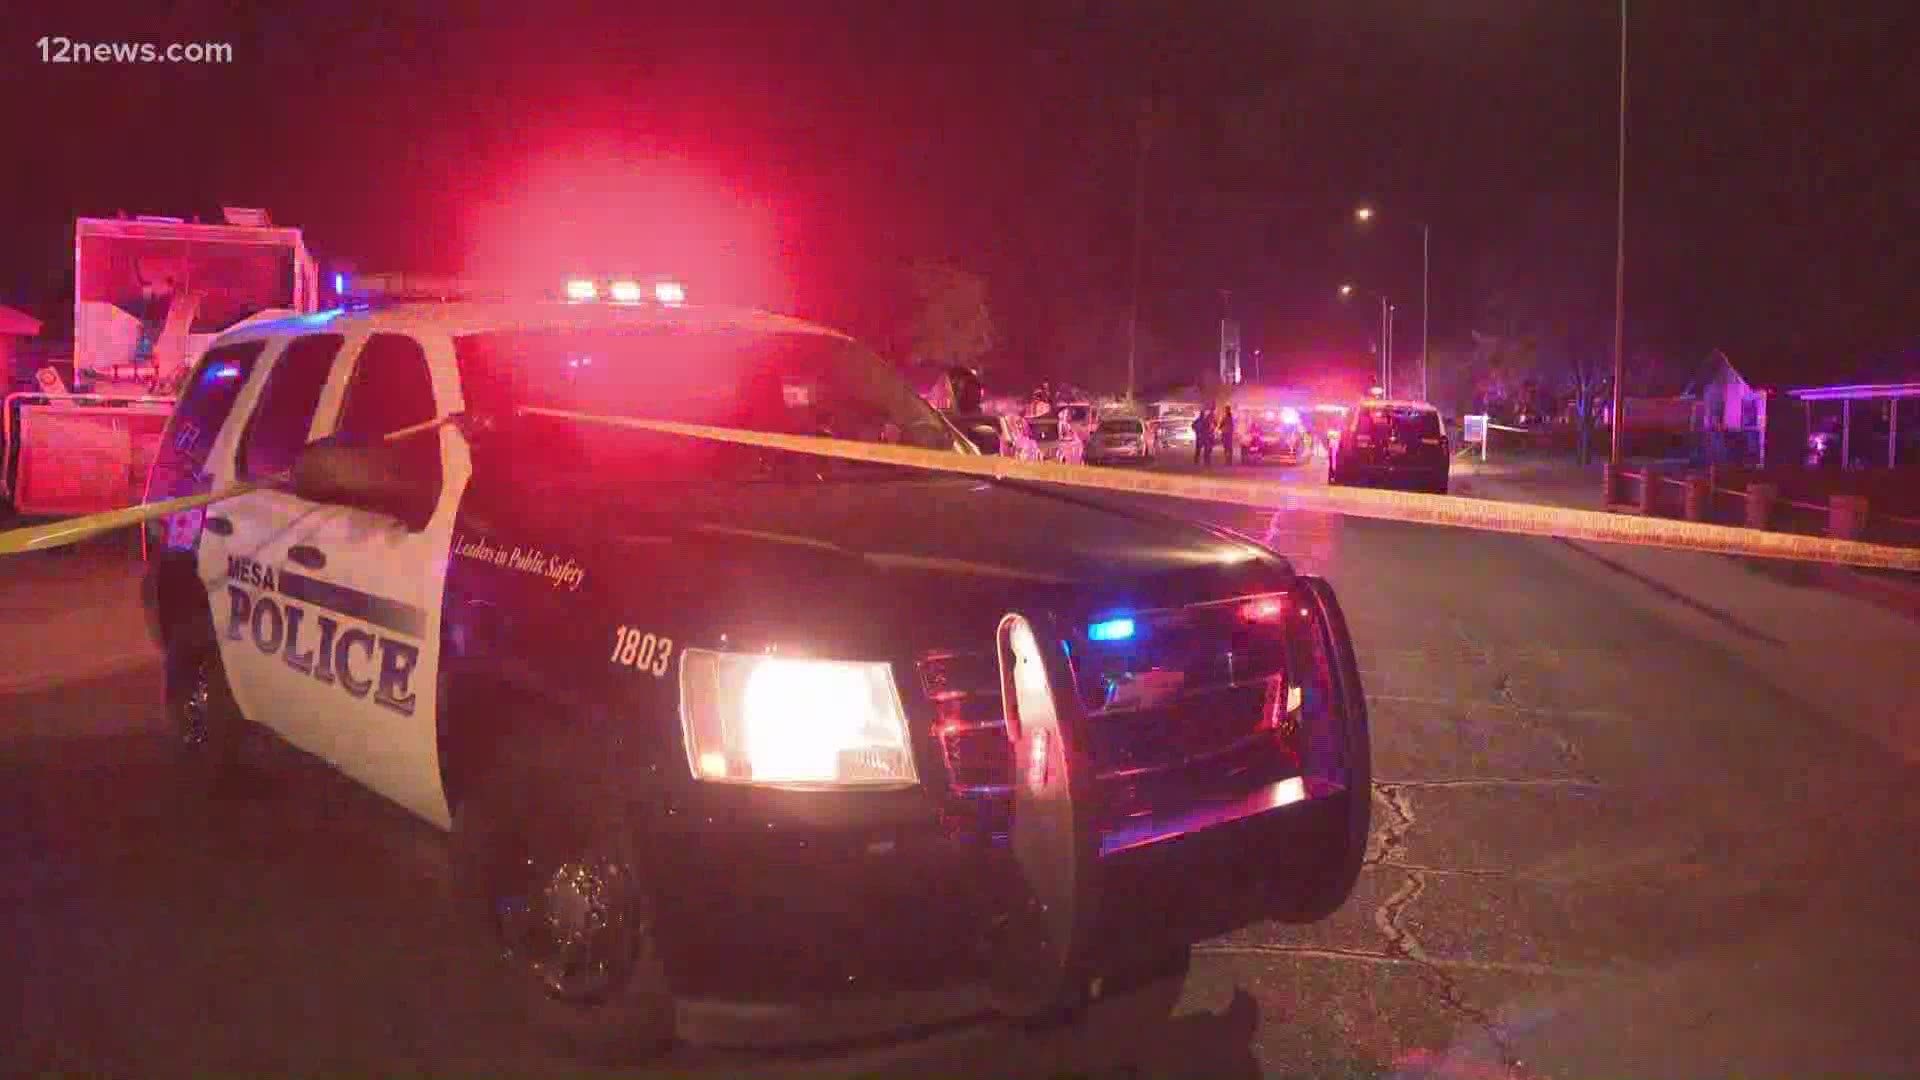 One person was injured and two others were killed in a shooting incident in Mesa on Saturday night.